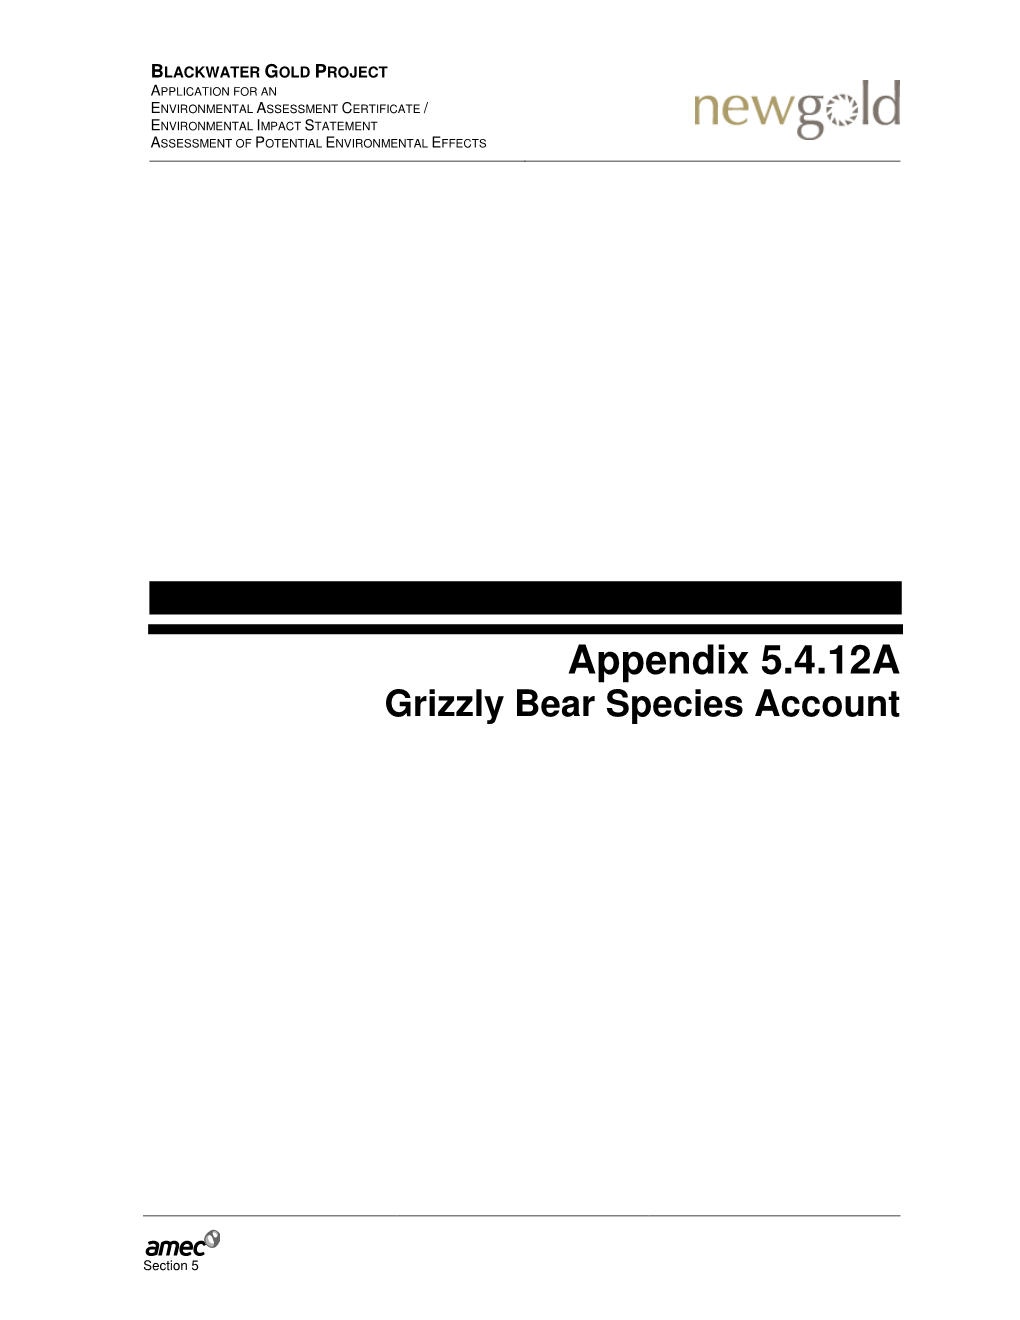 Appendix 5.4.12A Grizzly Bear Species Account